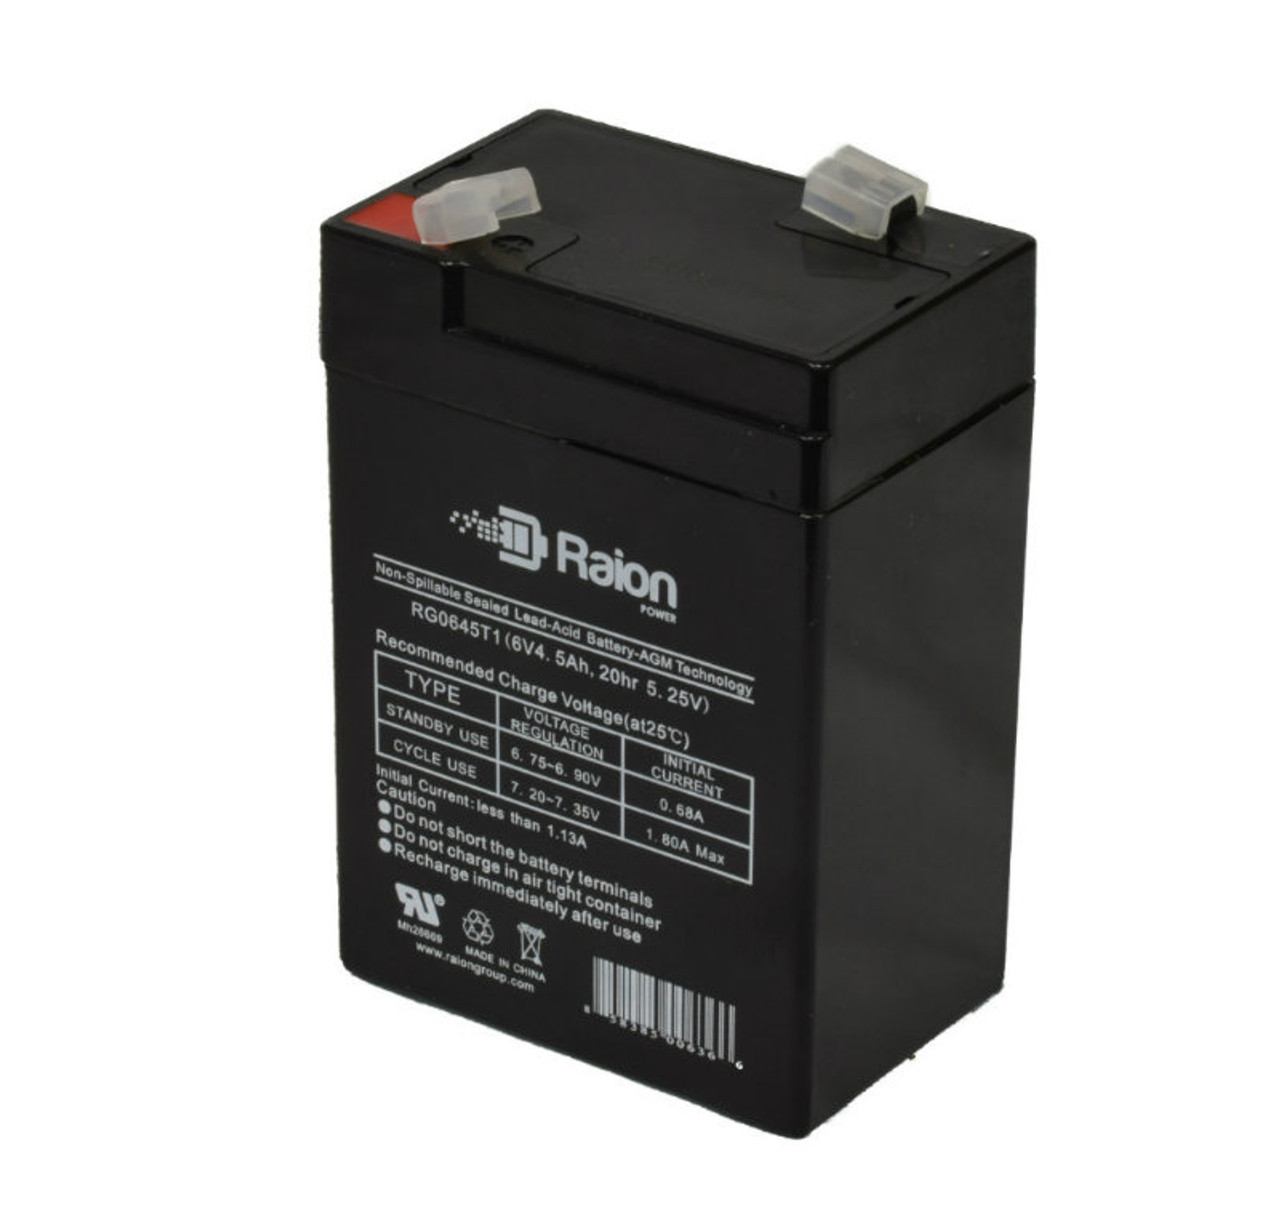 Raion Power RG0645T1 6V 4.5Ah Replacement Battery Cartridge for Power Sonic PS-640